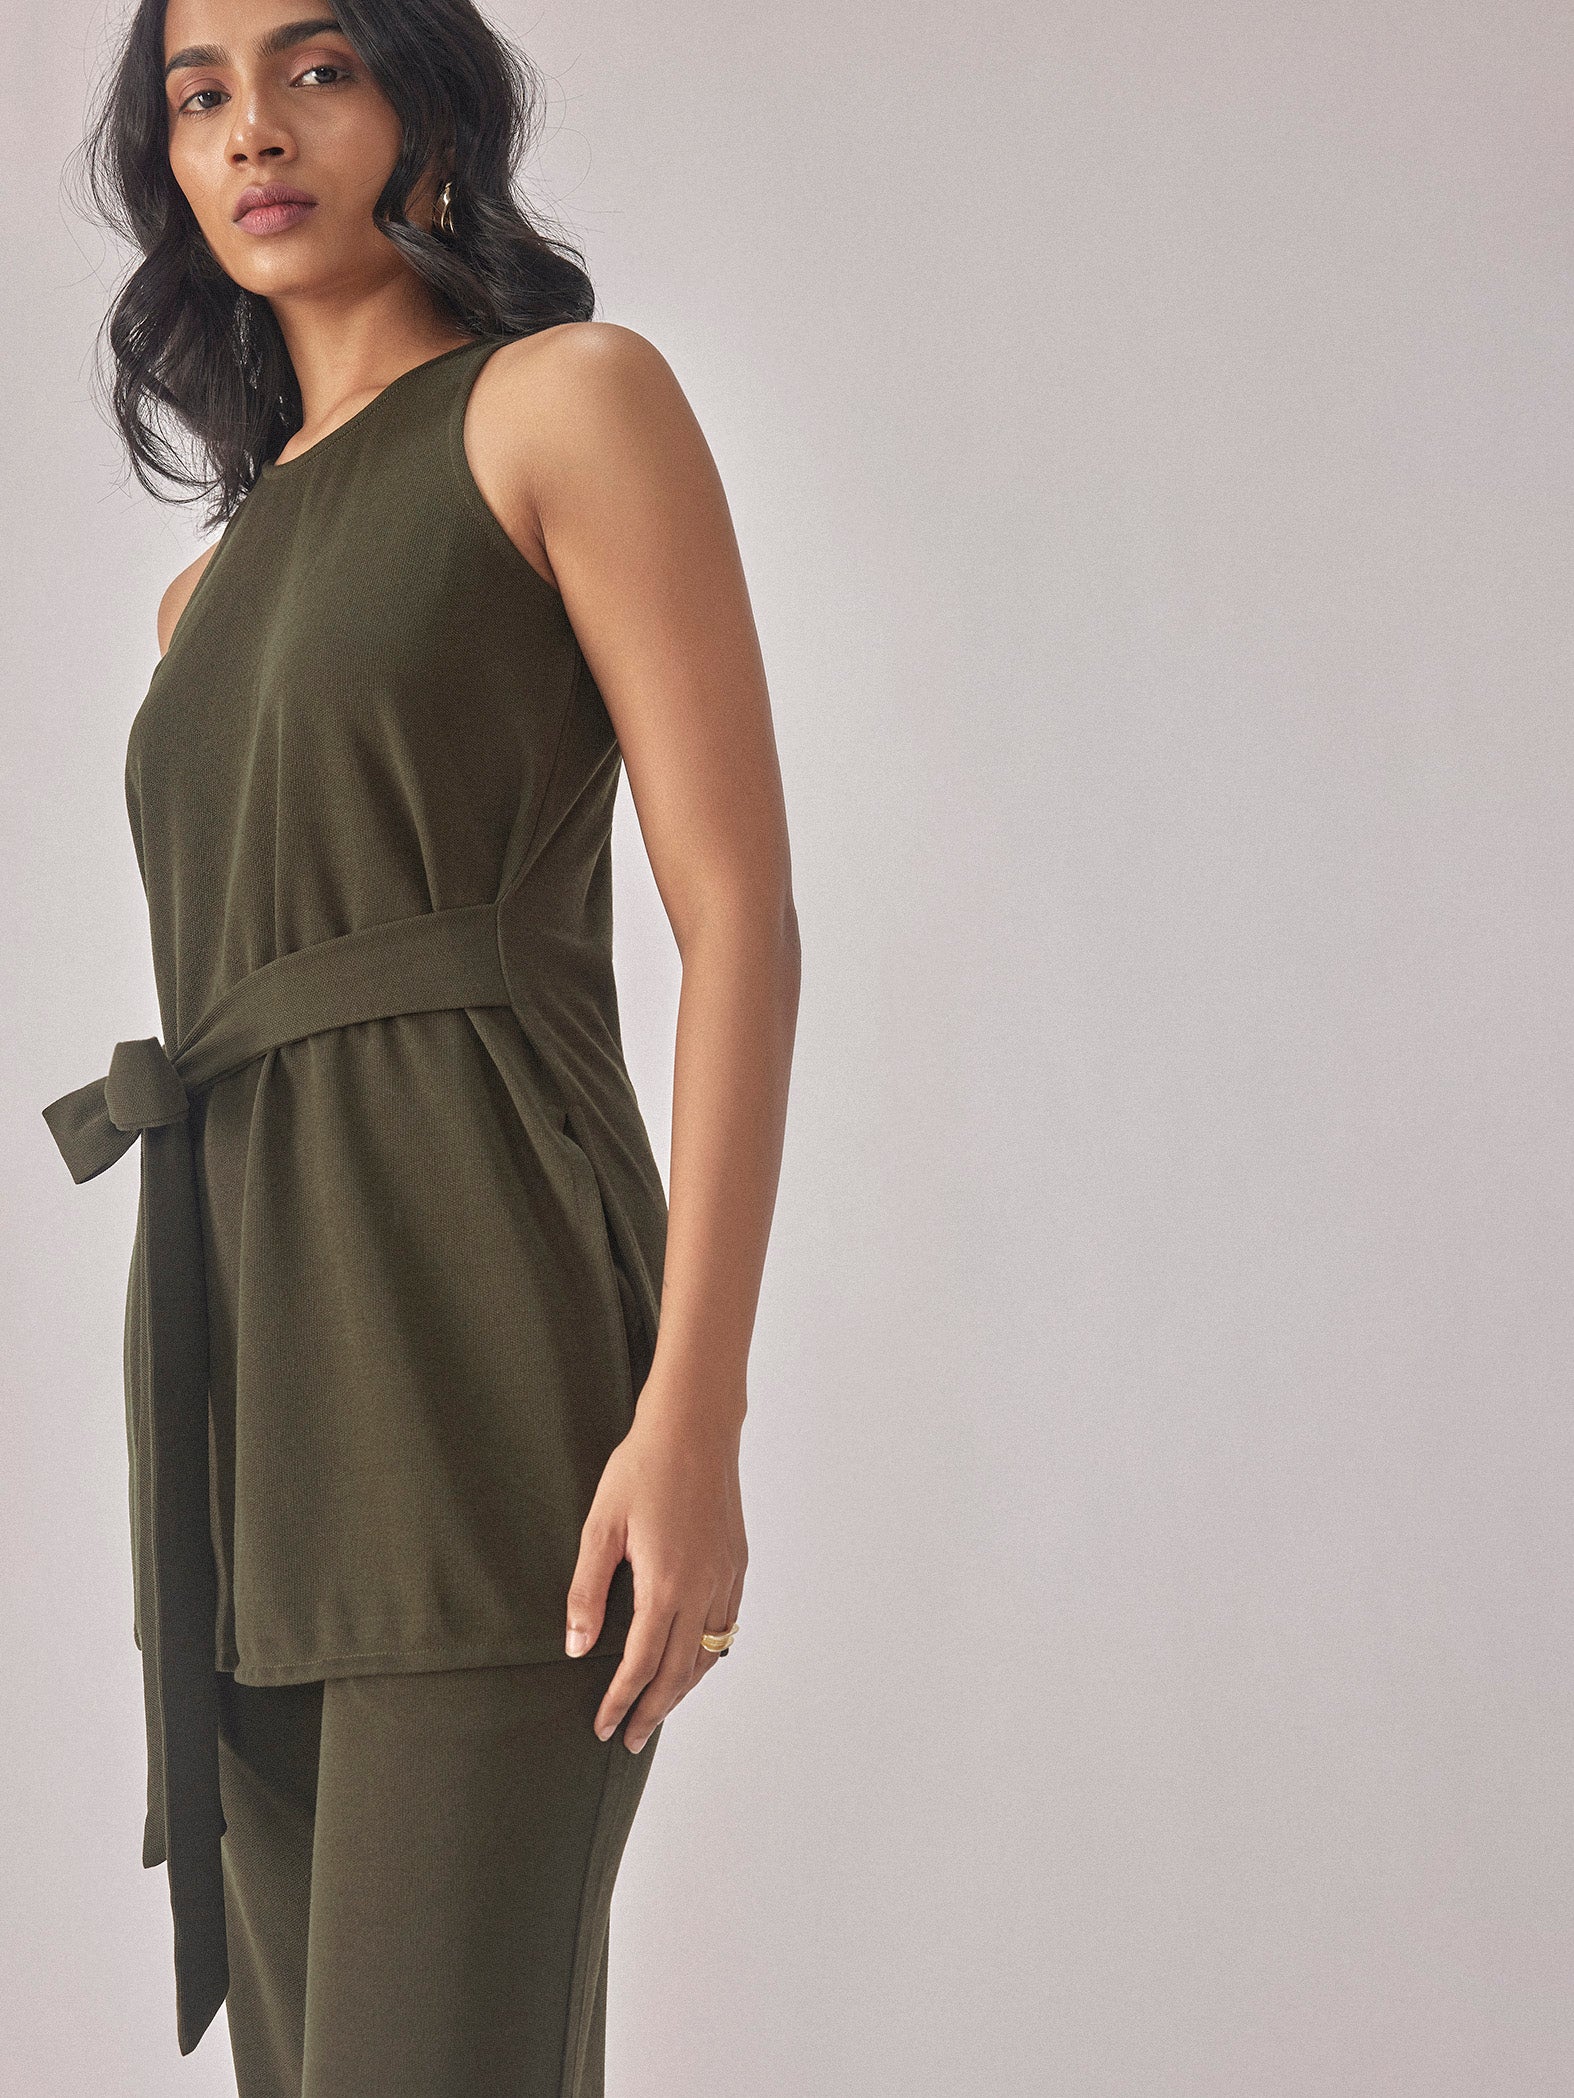 Olive Knit Front Tie Top